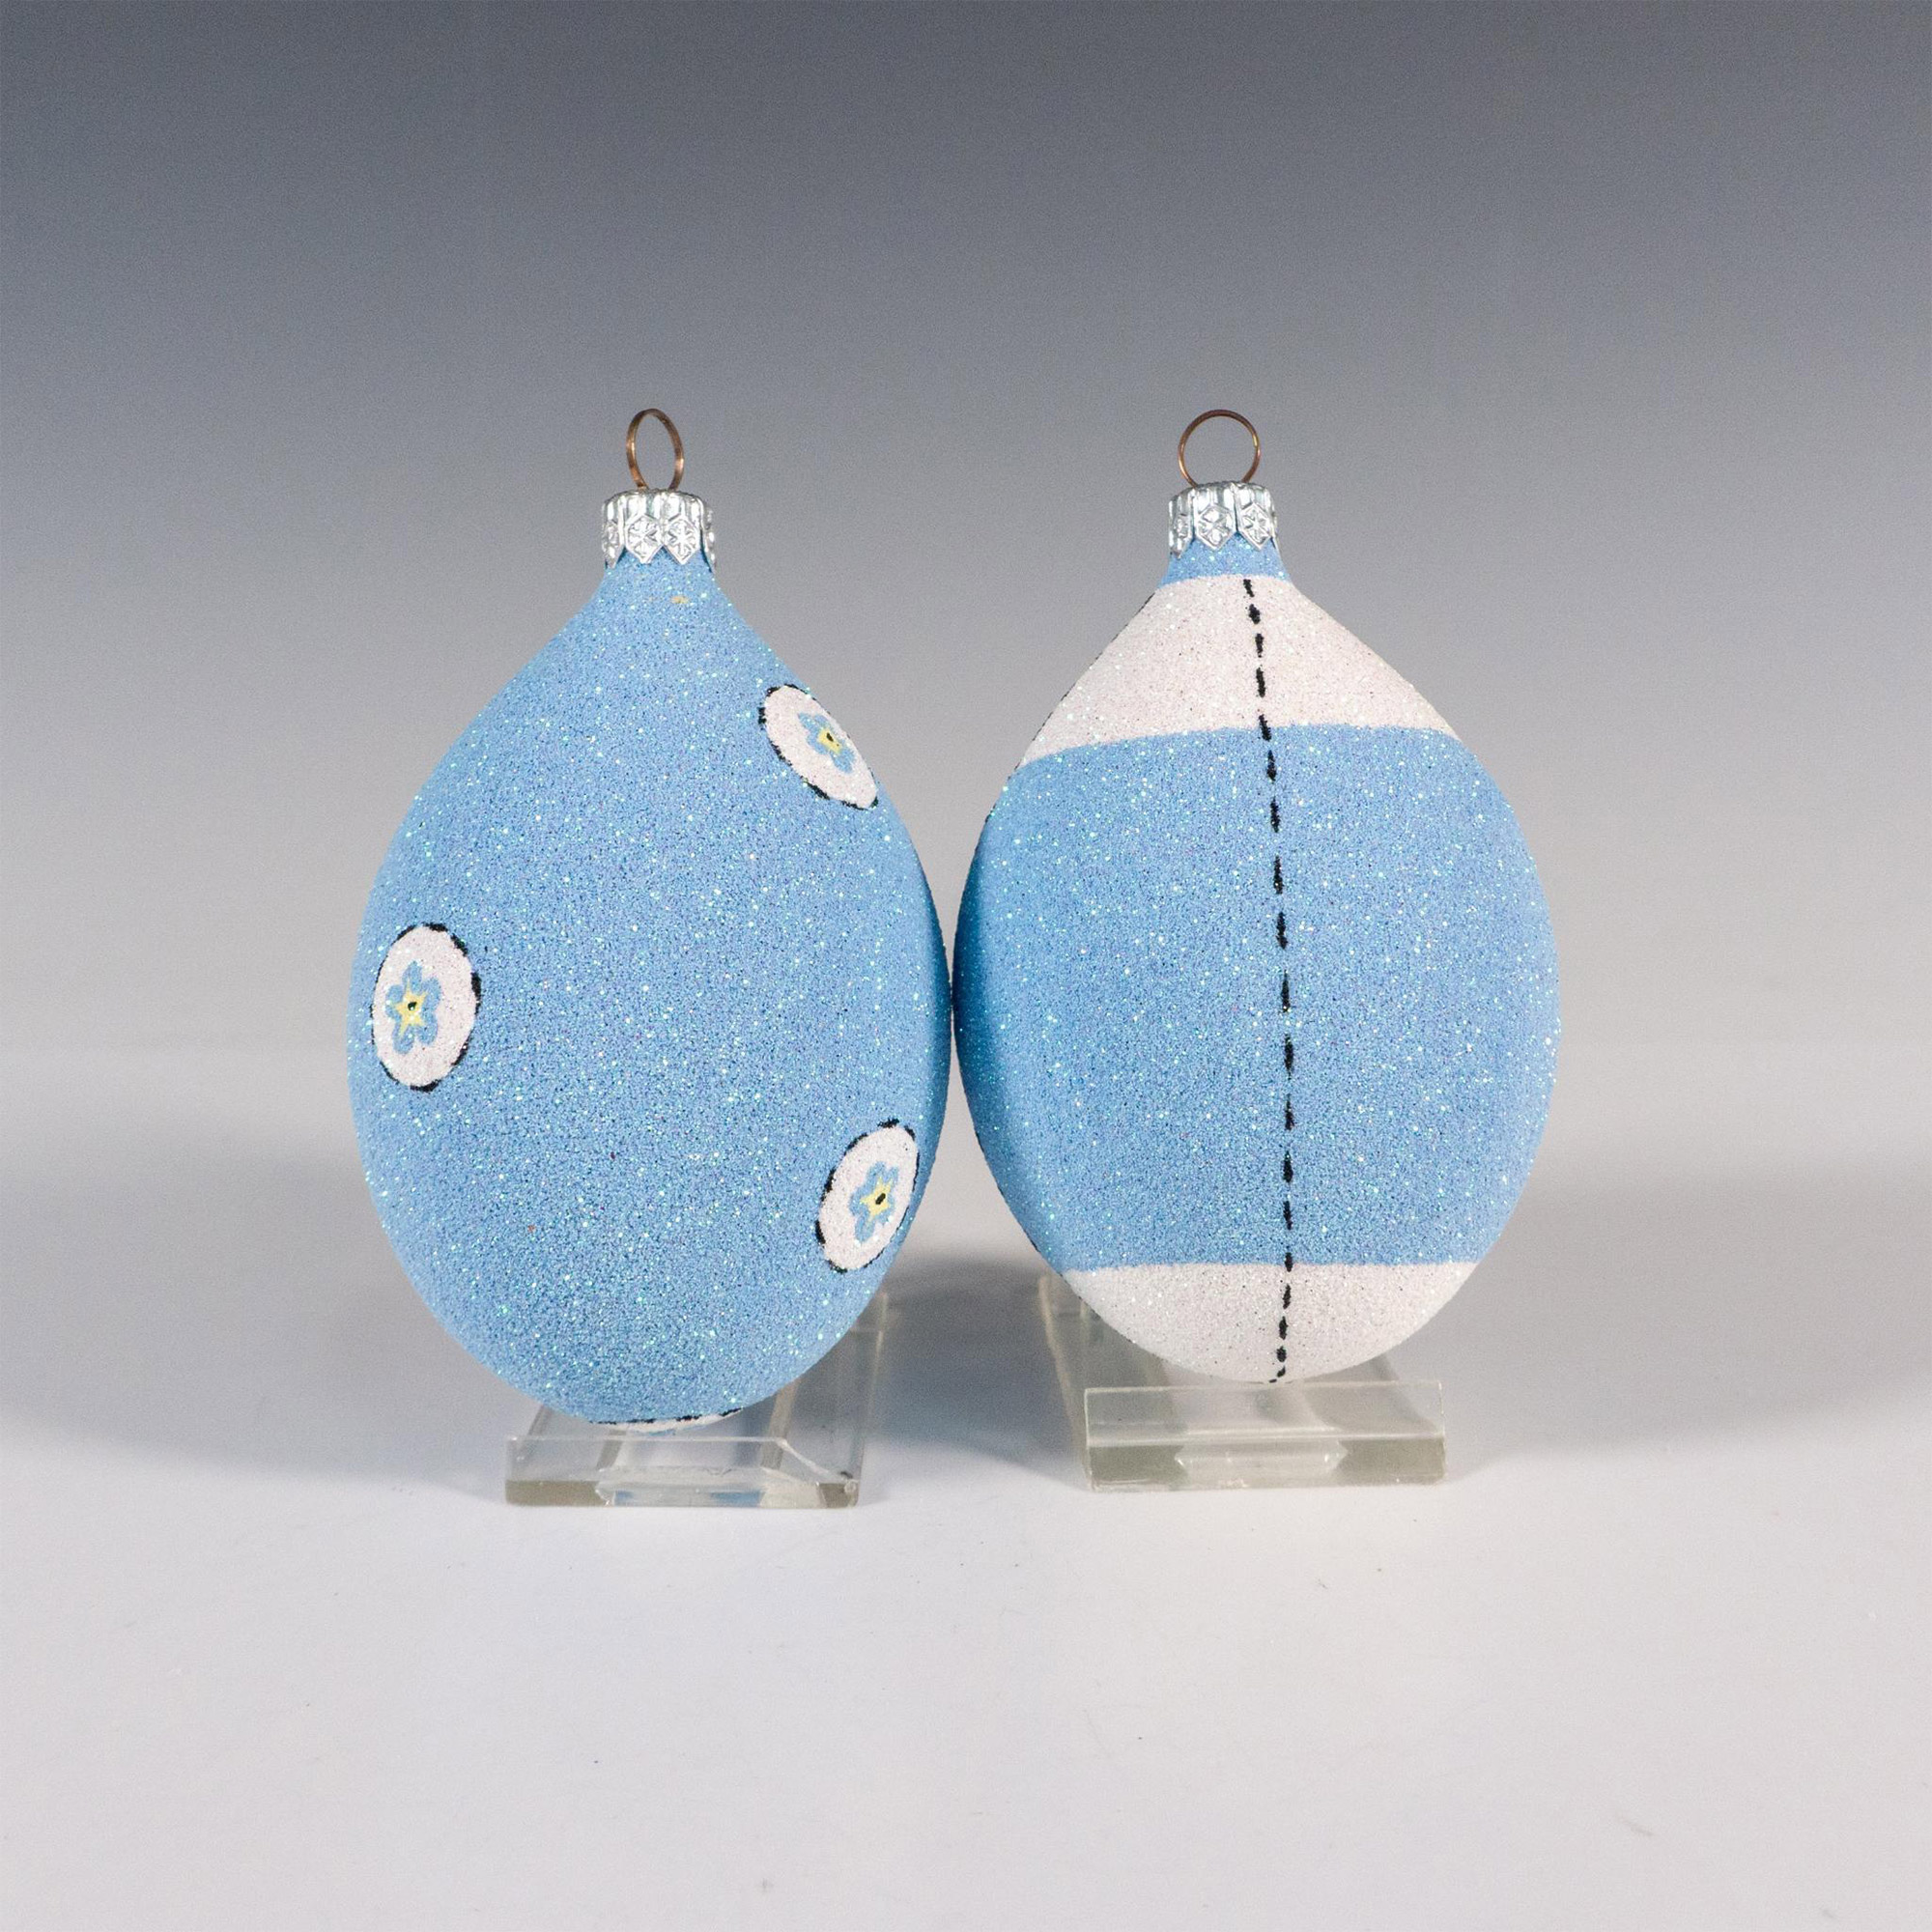 2pc Patricia Breen Forget-Me-Not Ornaments - Image 2 of 2